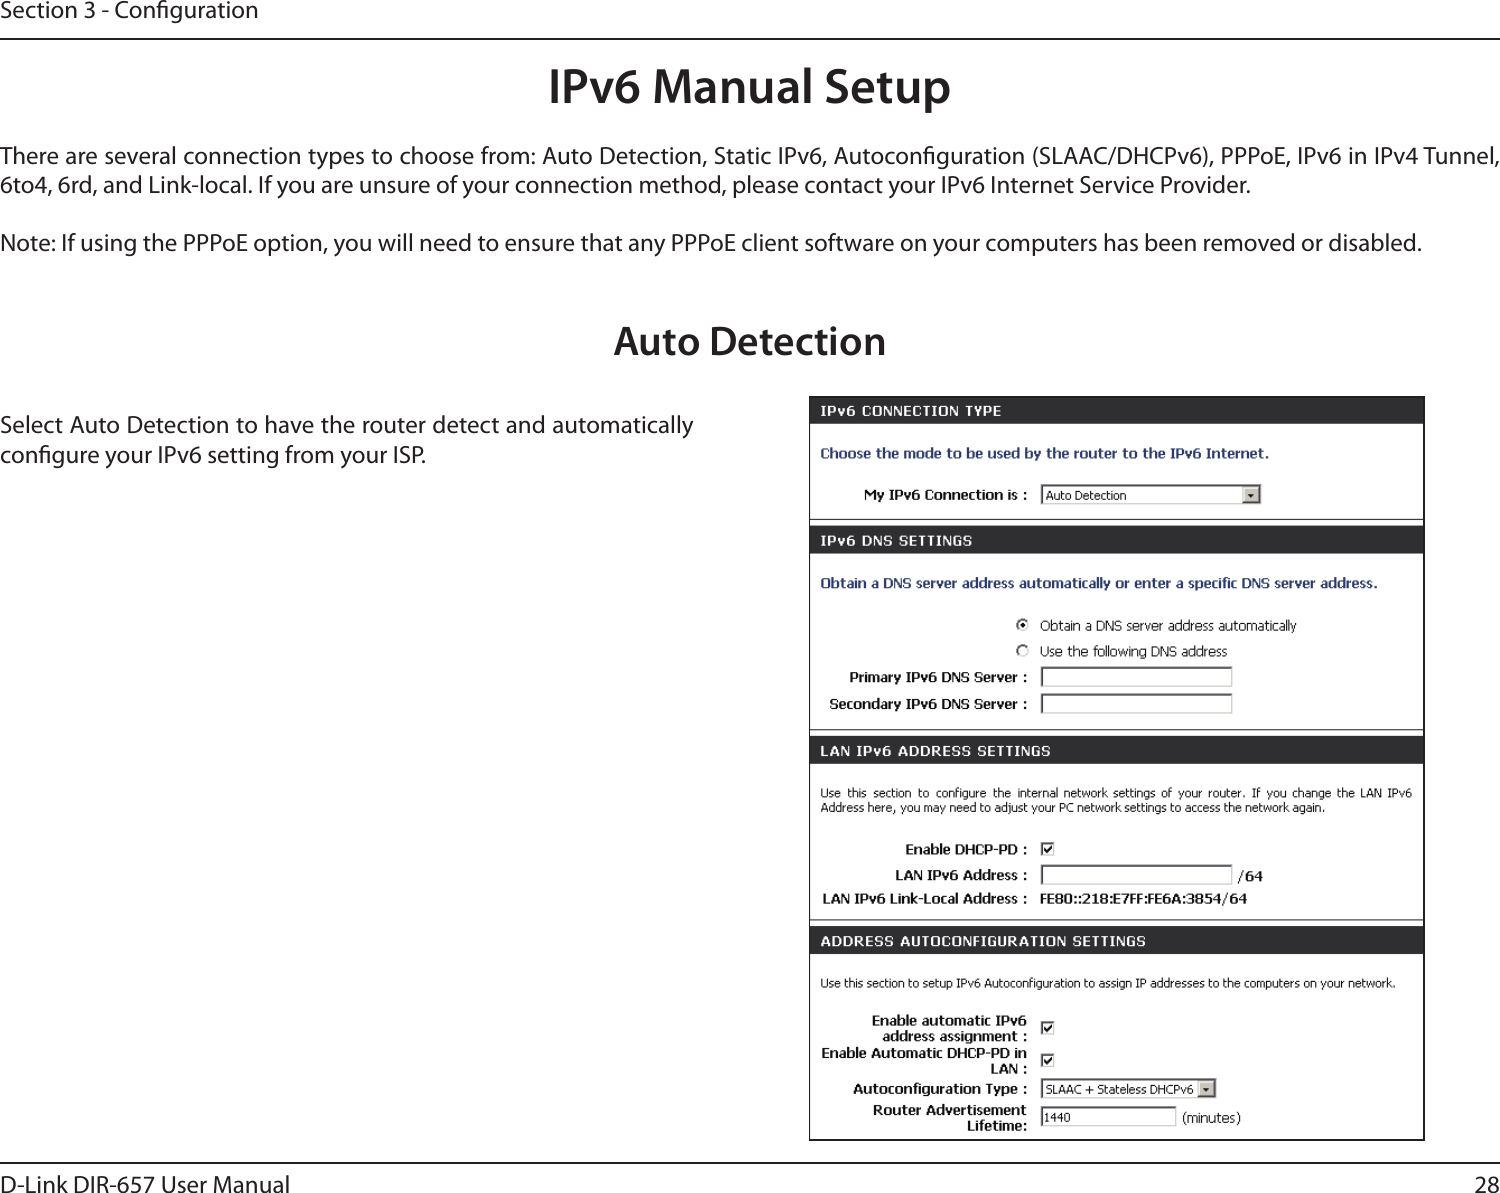 28D-Link DIR-657 User ManualSection 3 - CongurationIPv6 Manual SetupThere are several connection types to choose from: Auto Detection, Static IPv6, Autoconguration (SLAAC/DHCPv6), PPPoE, IPv6 in IPv4 Tunnel, 6to4, 6rd, and Link-local. If you are unsure of your connection method, please contact your IPv6 Internet Service Provider. Note: If using the PPPoE option, you will need to ensure that any PPPoE client software on your computers has been removed or disabled.Auto DetectionSelect Auto Detection to have the router detect and automatically congure your IPv6 setting from your ISP.